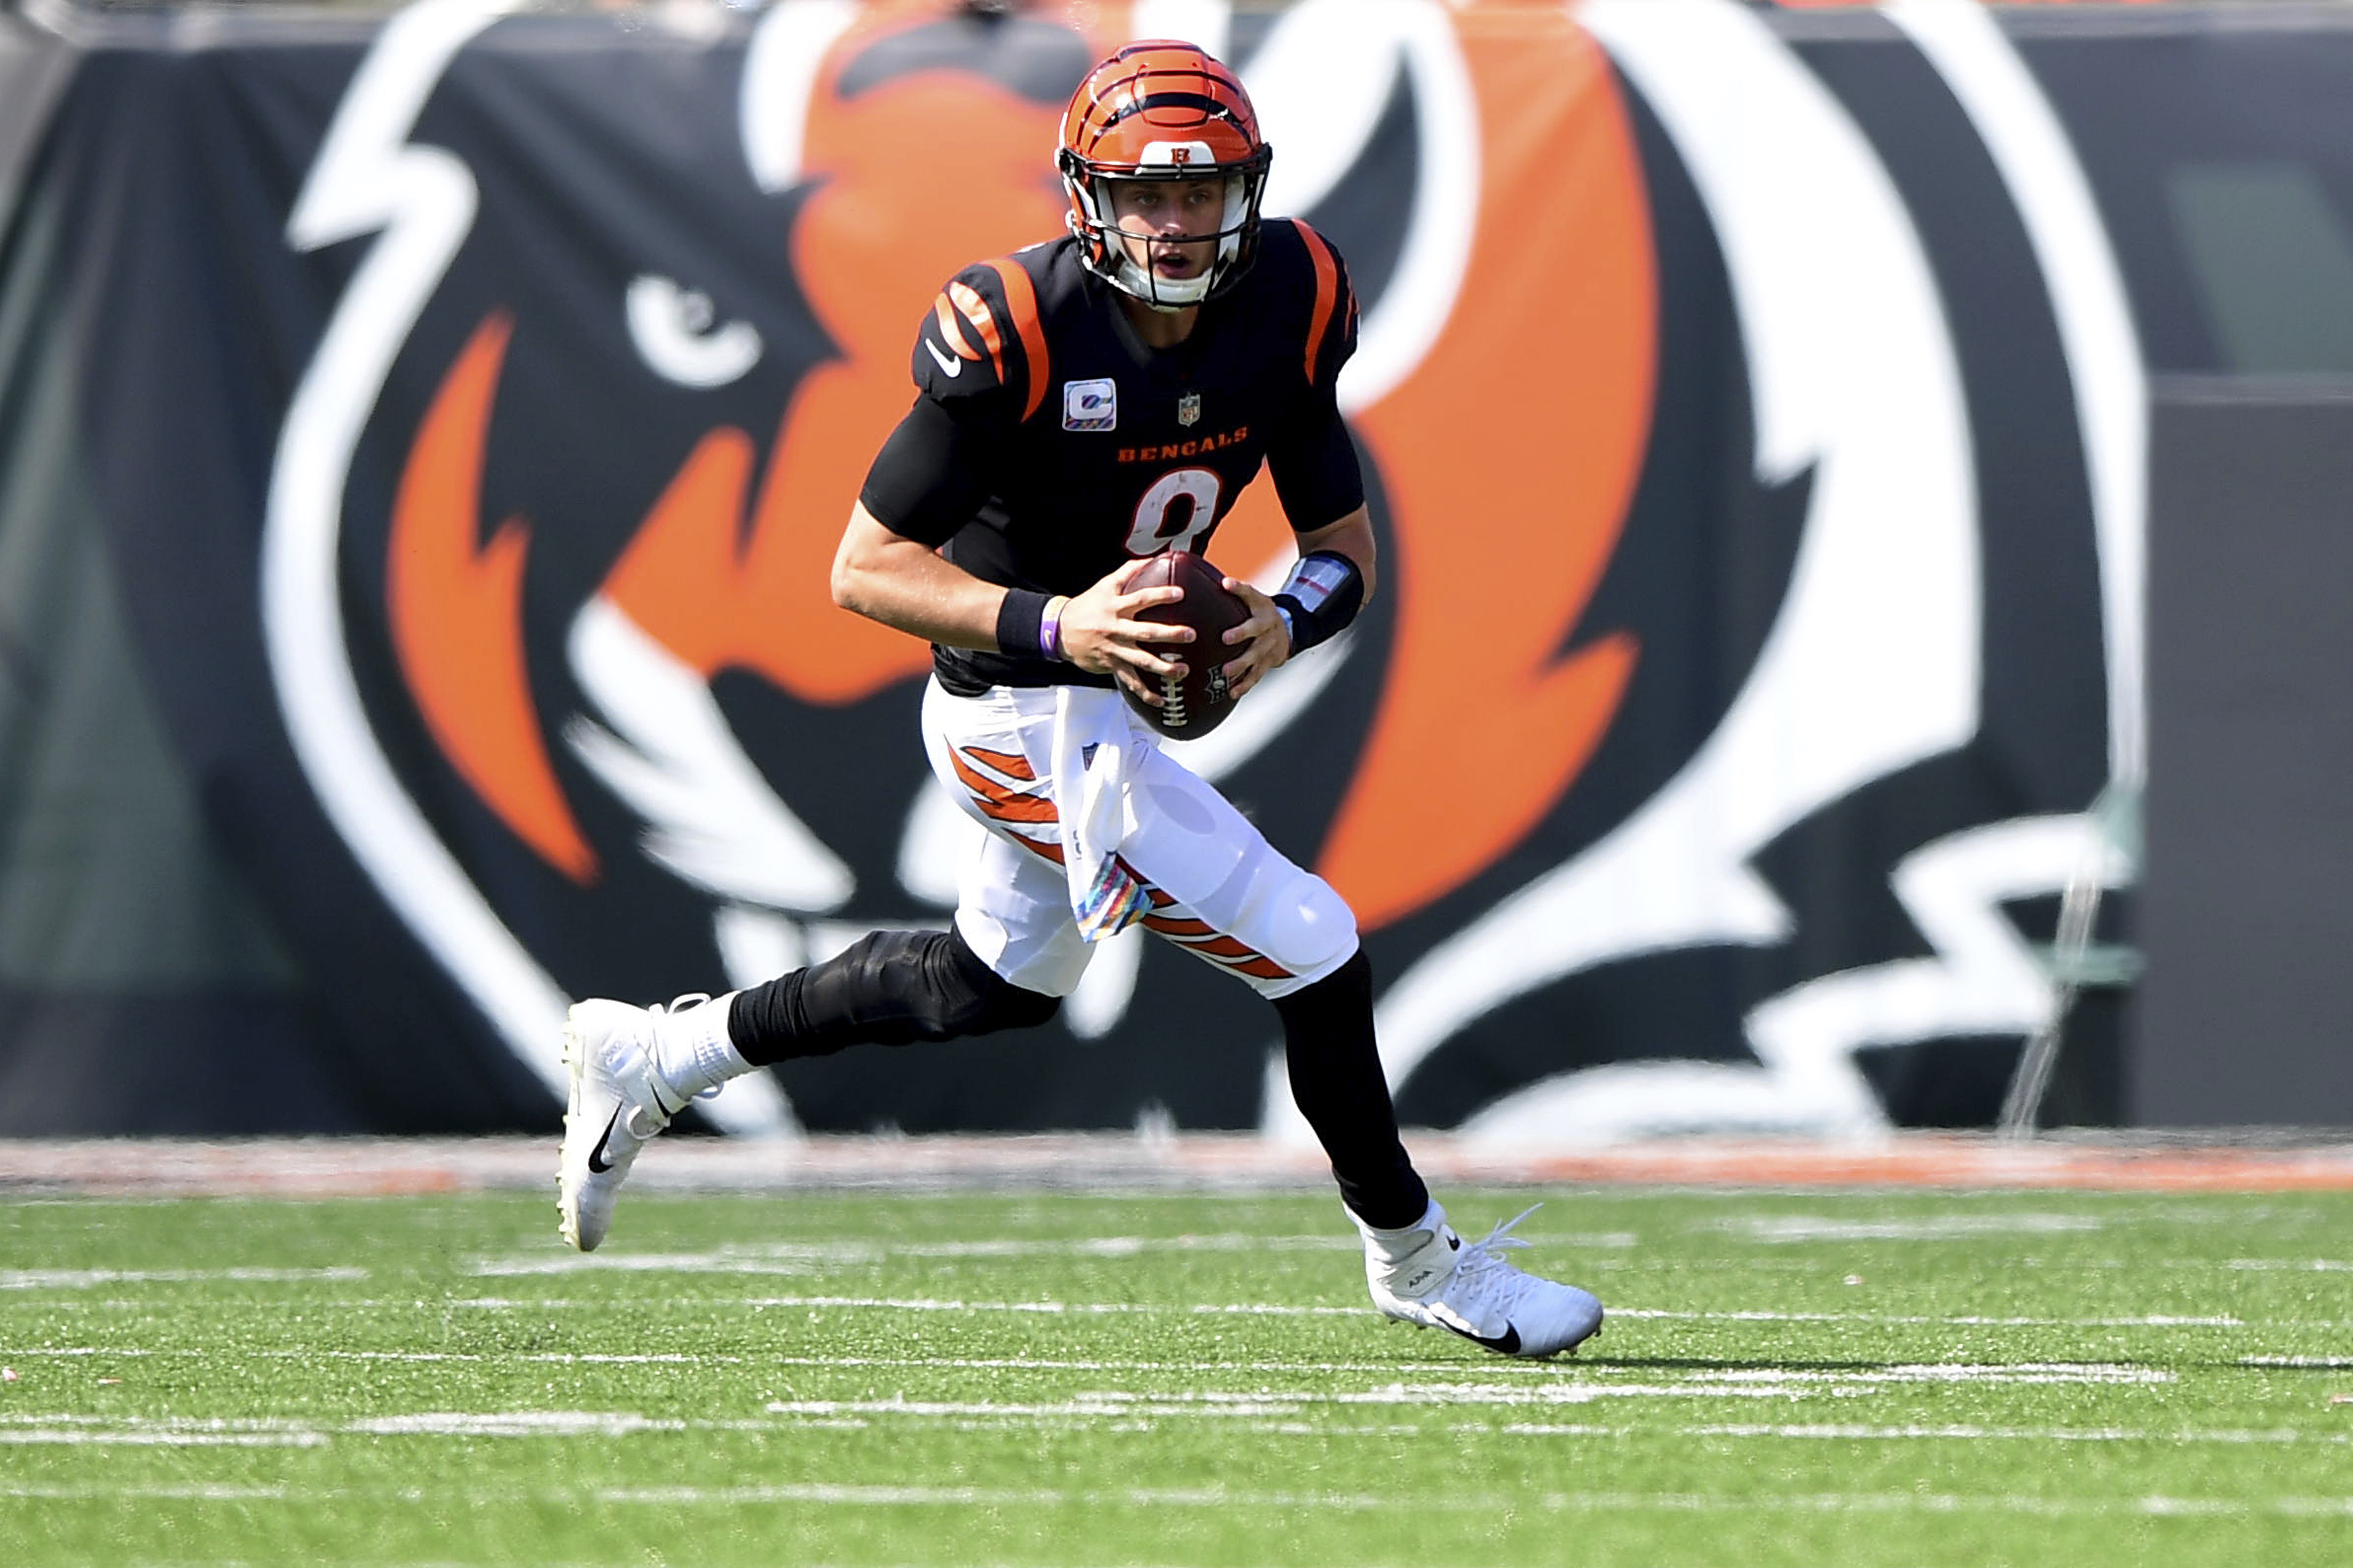 Bengals Game Today: Bengals vs Lions injury report, spread, over